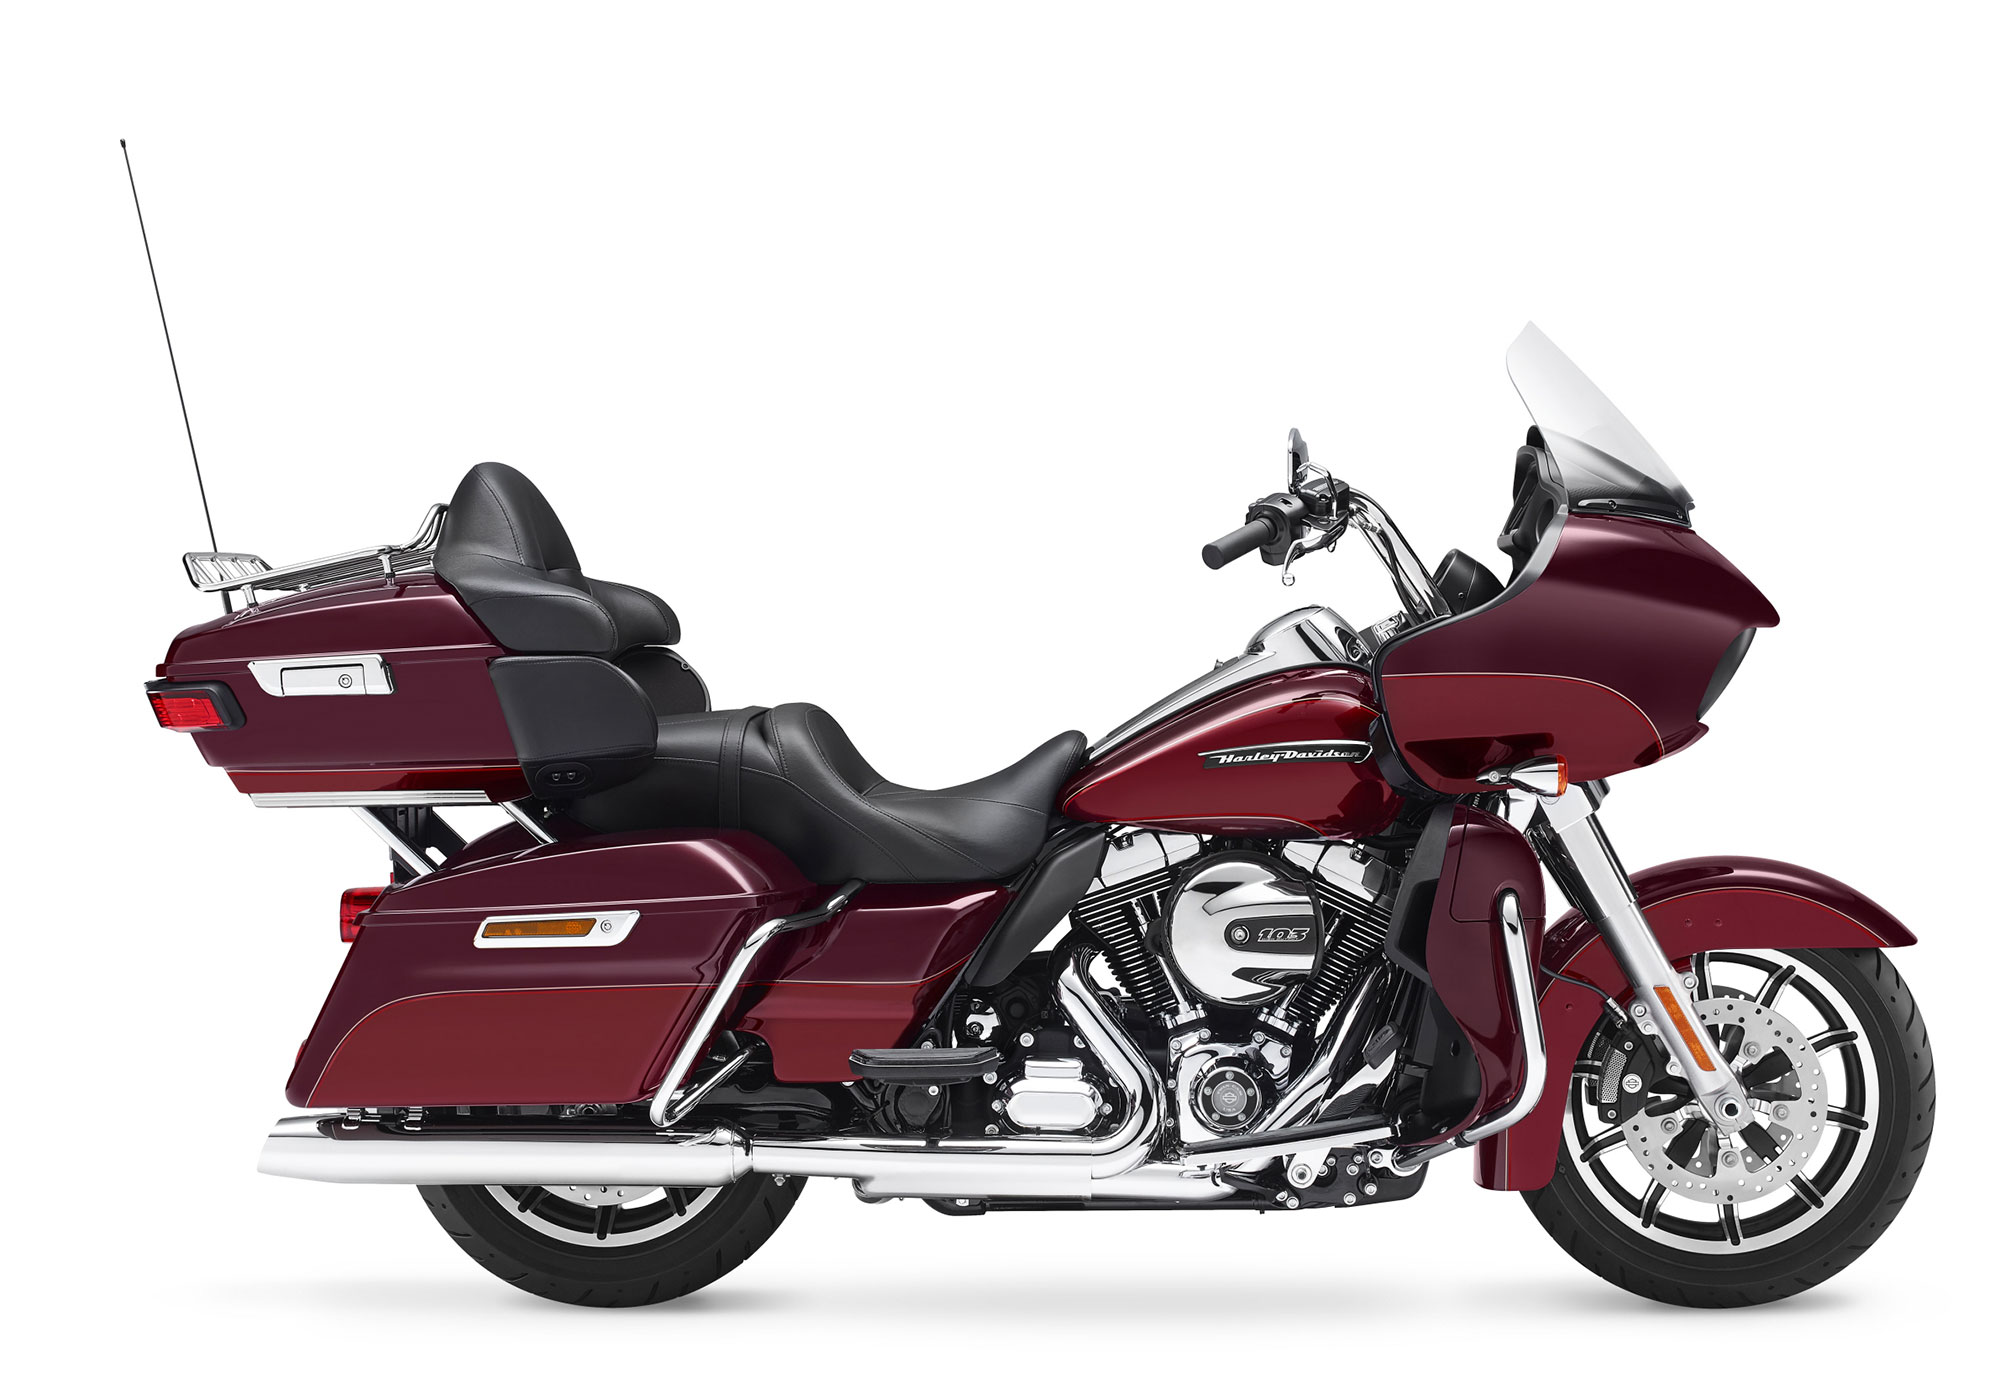 2016 Harley Davidson Touring Road Glide Ultra Review